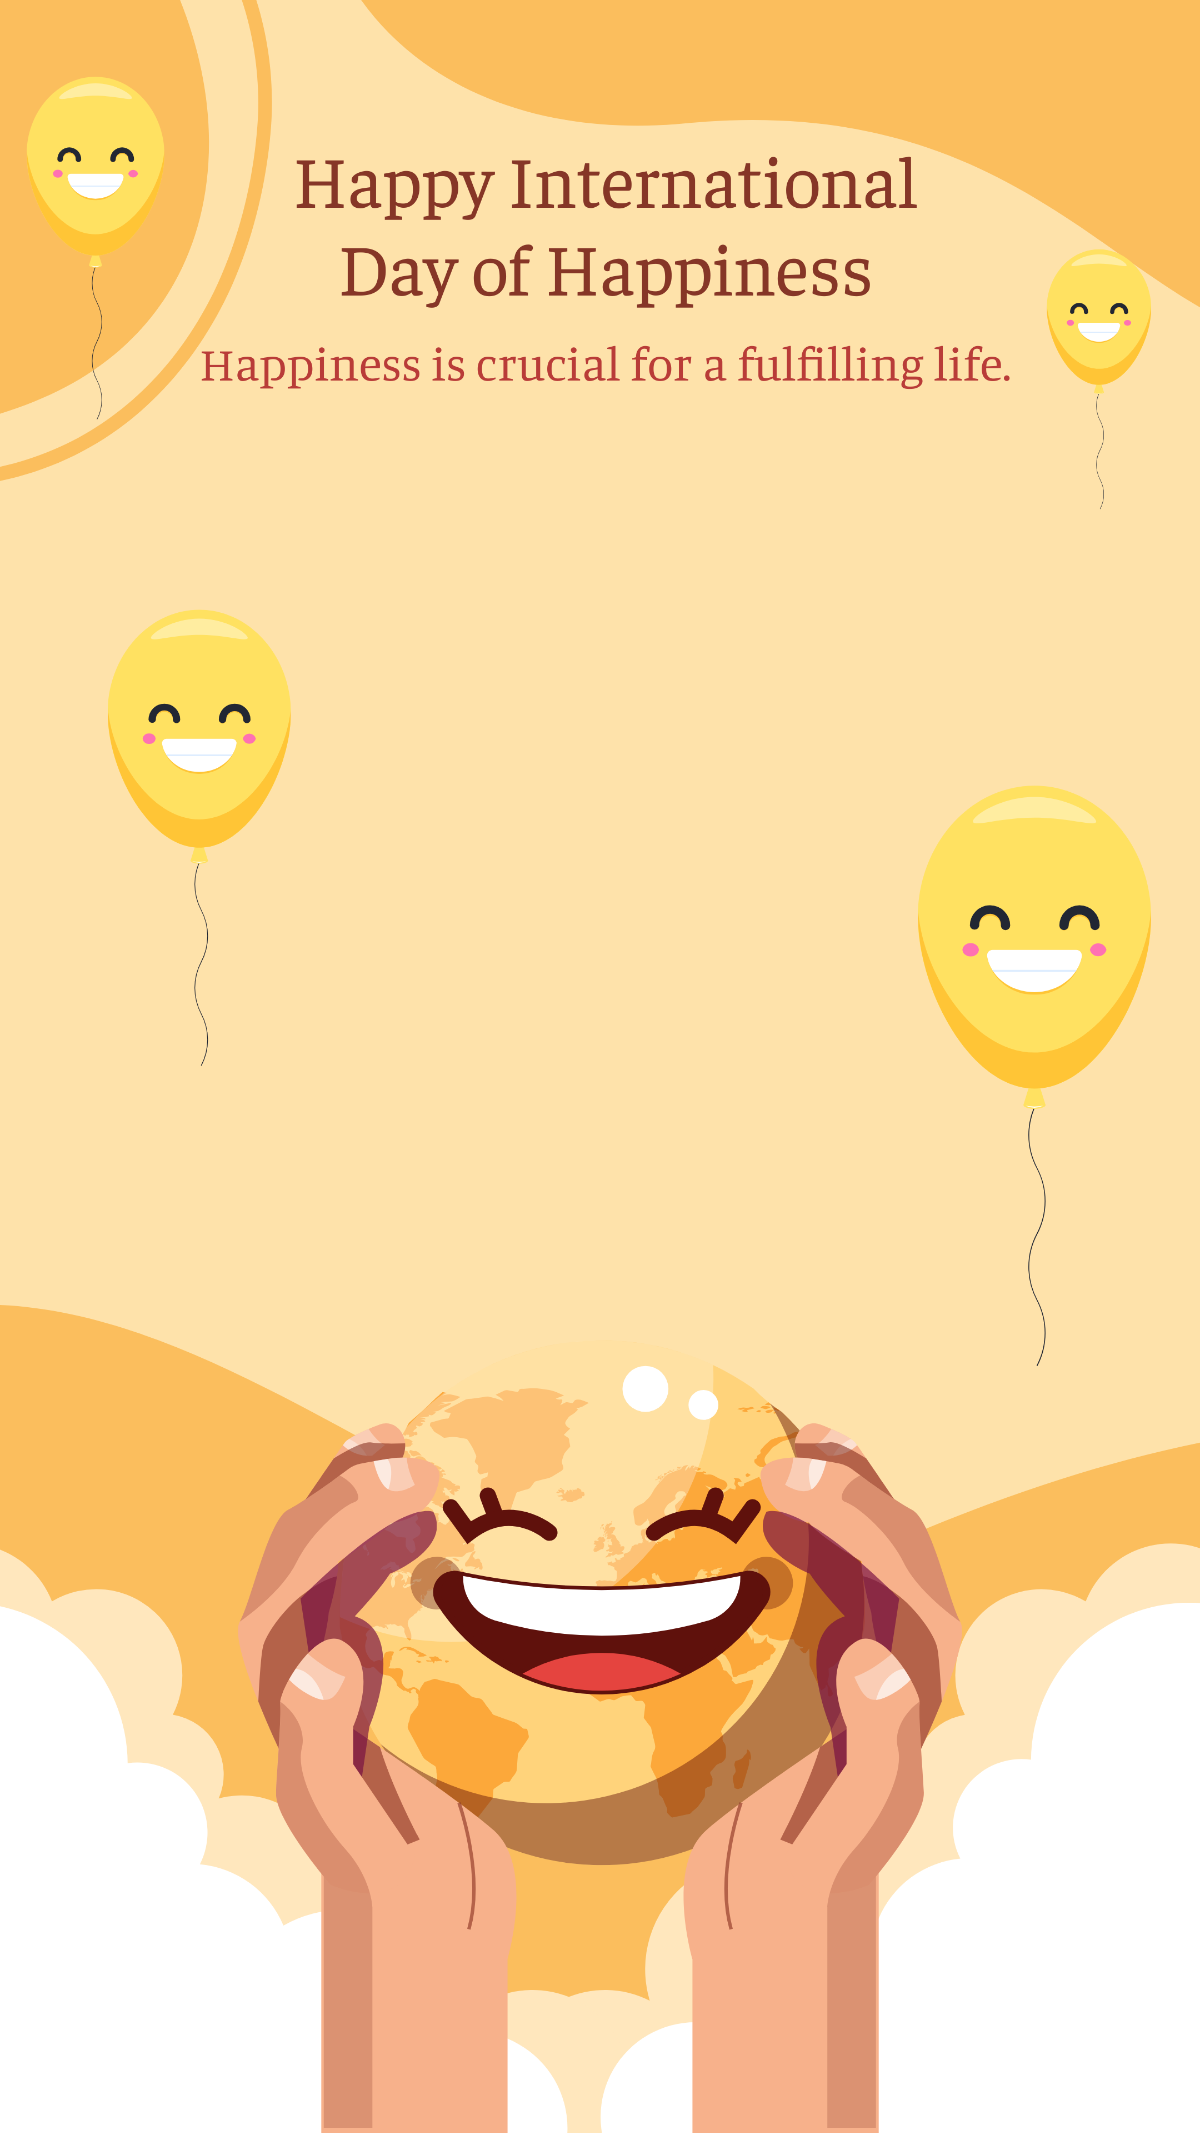 International Day of Happiness Snapchat Geofilter Template